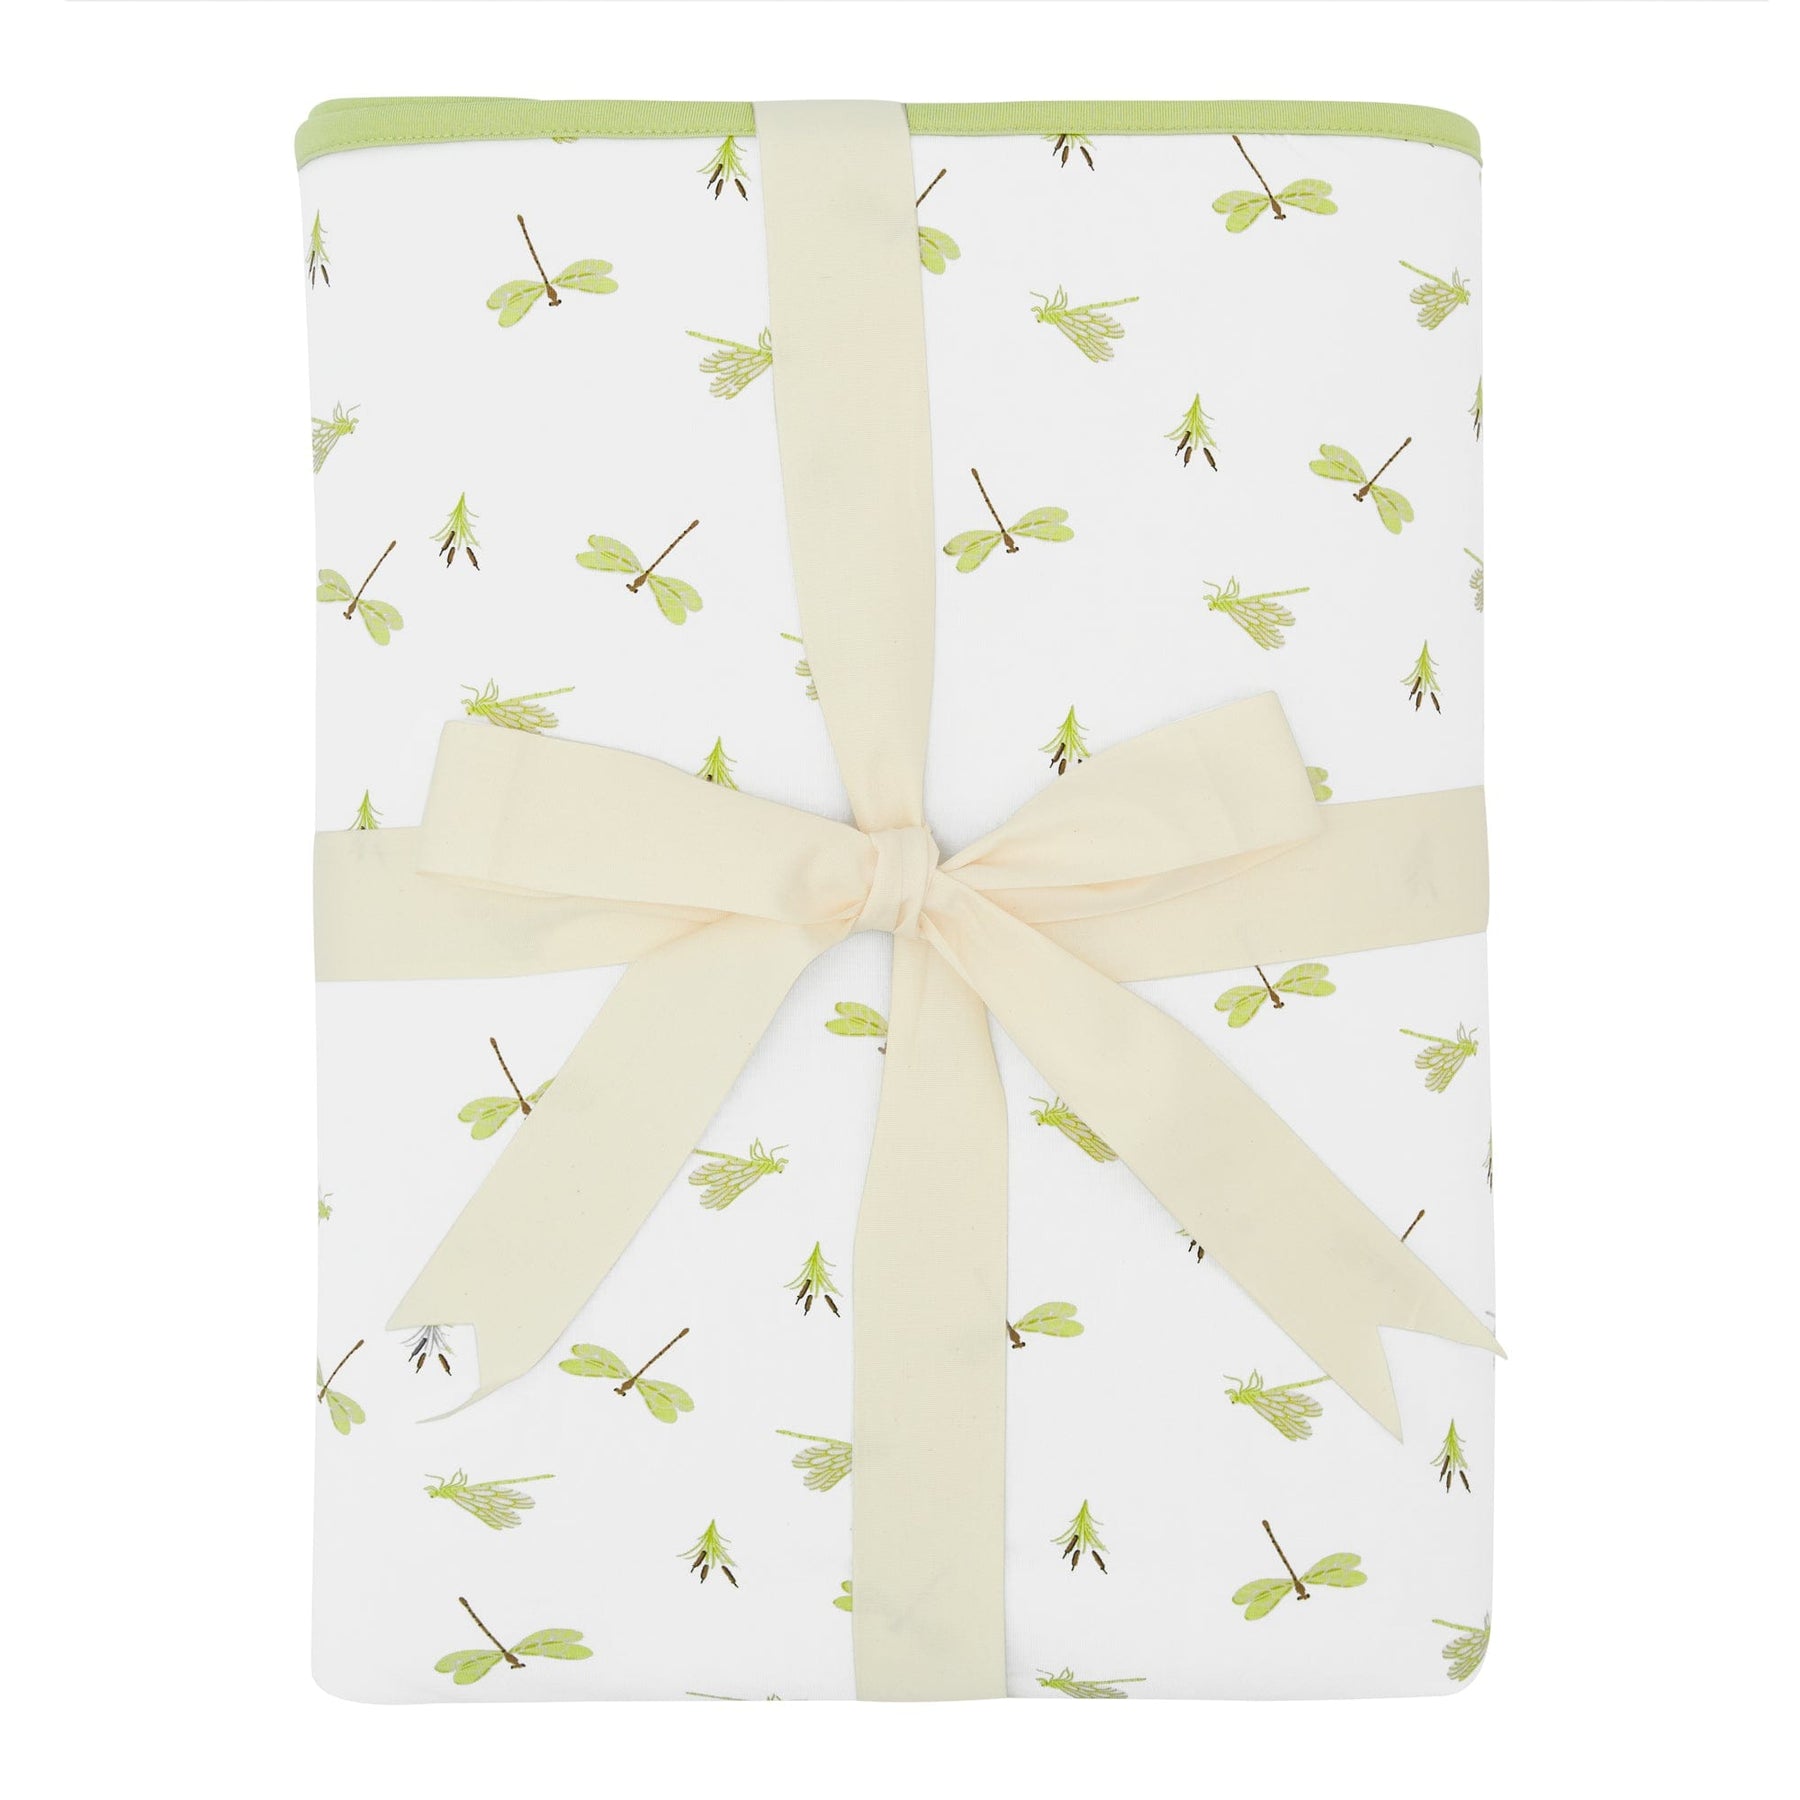 Kyte BABY Youth Blanket Dragonfly / Youth Youth Blanket in Dragonfly 1.0